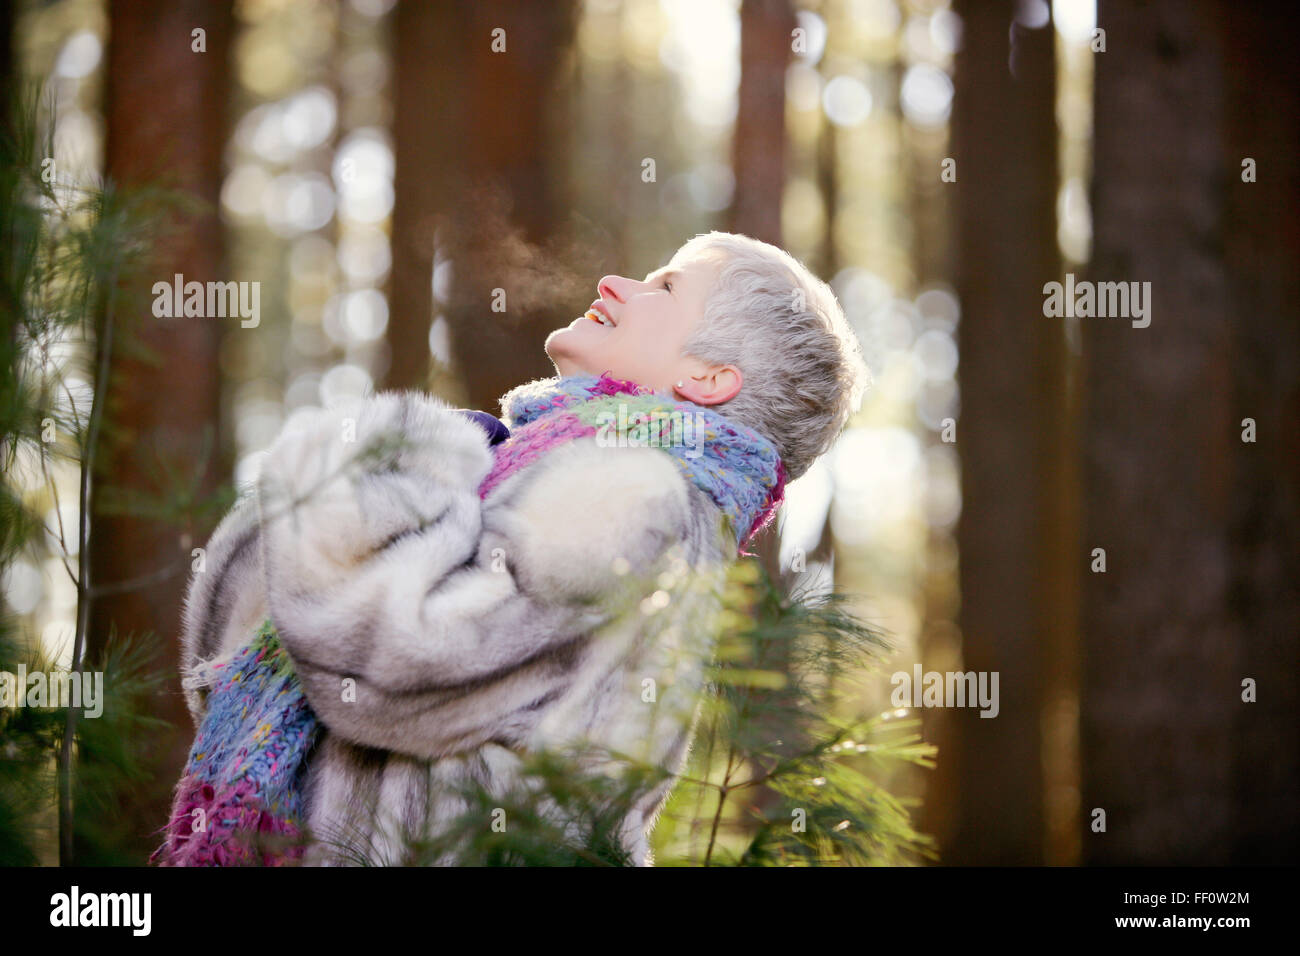 Older Caucasian woman standing outdoors Stock Photo